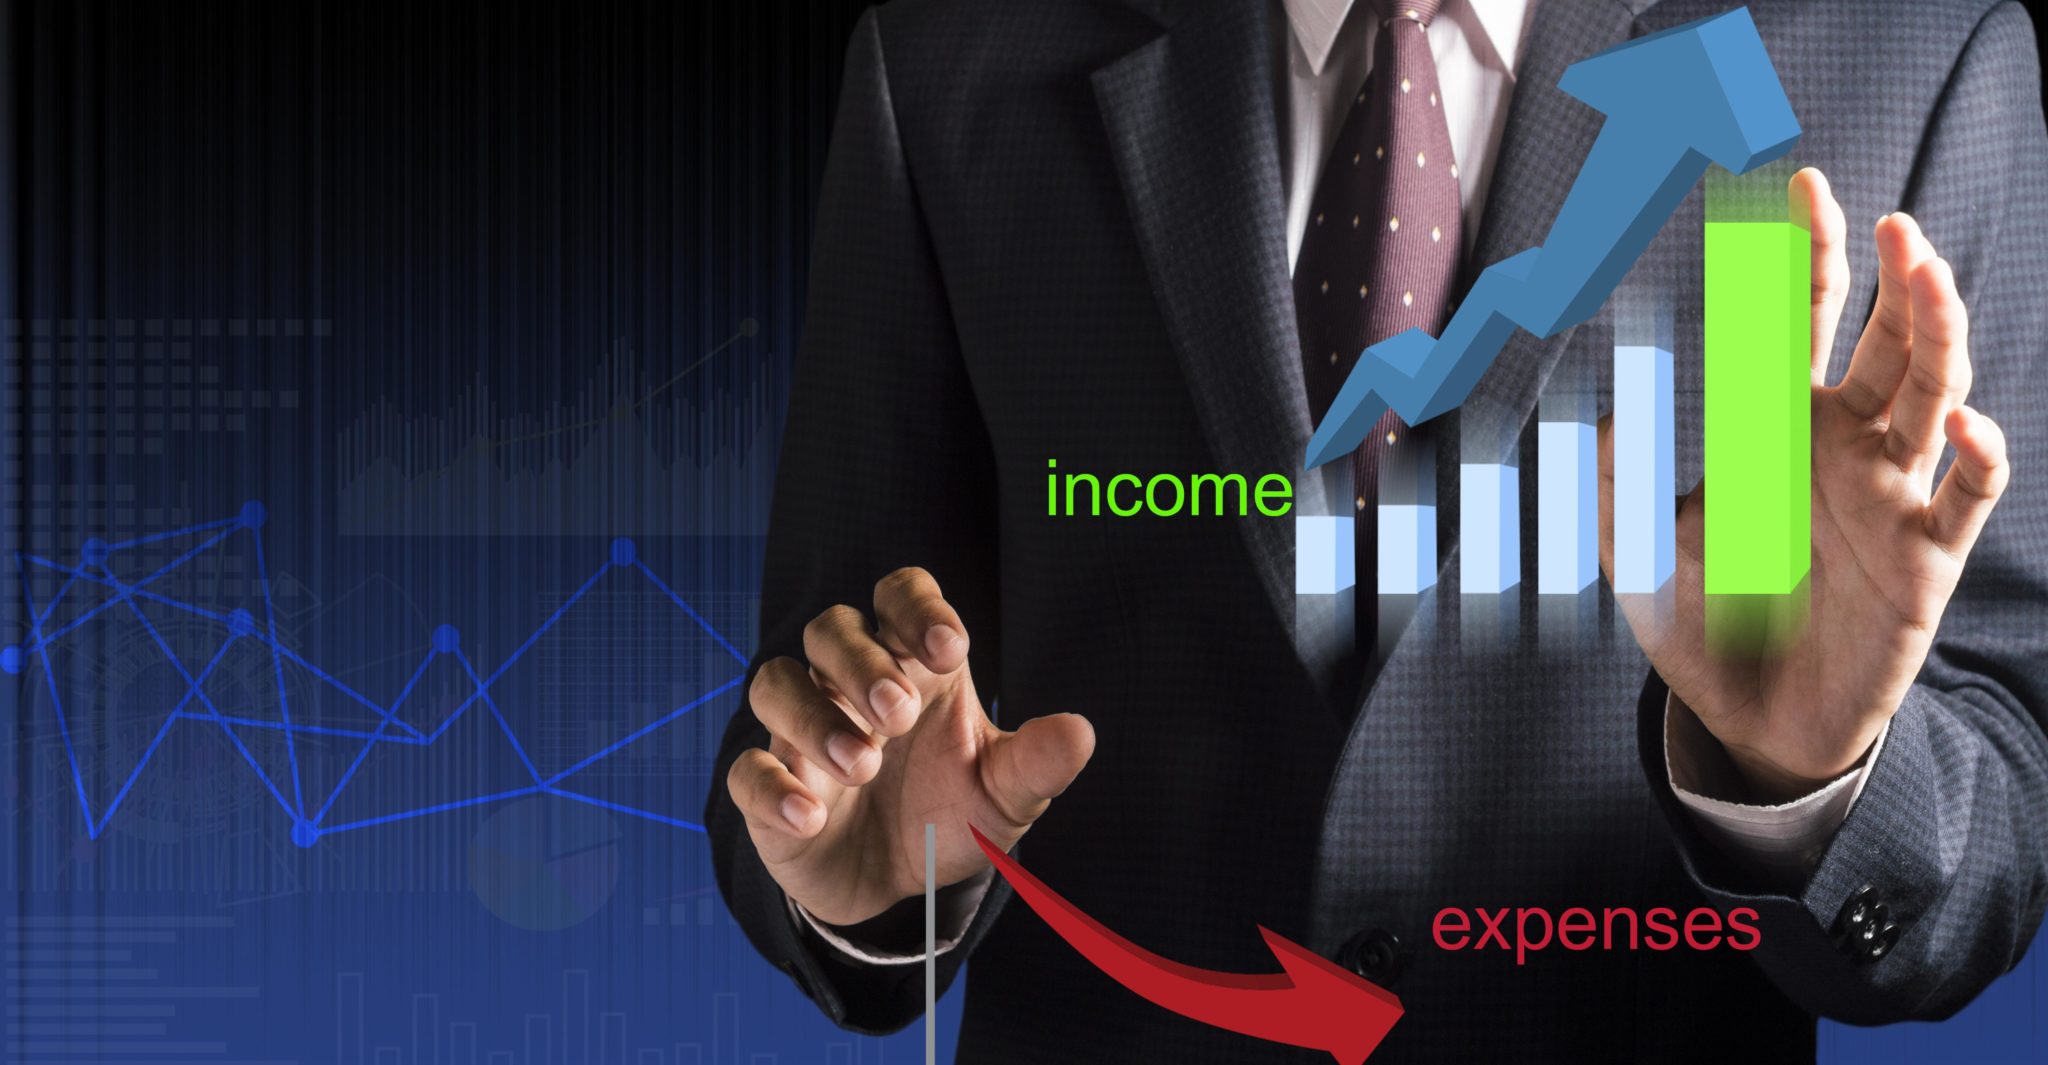 image of a man's hand hovering near an income expense graph